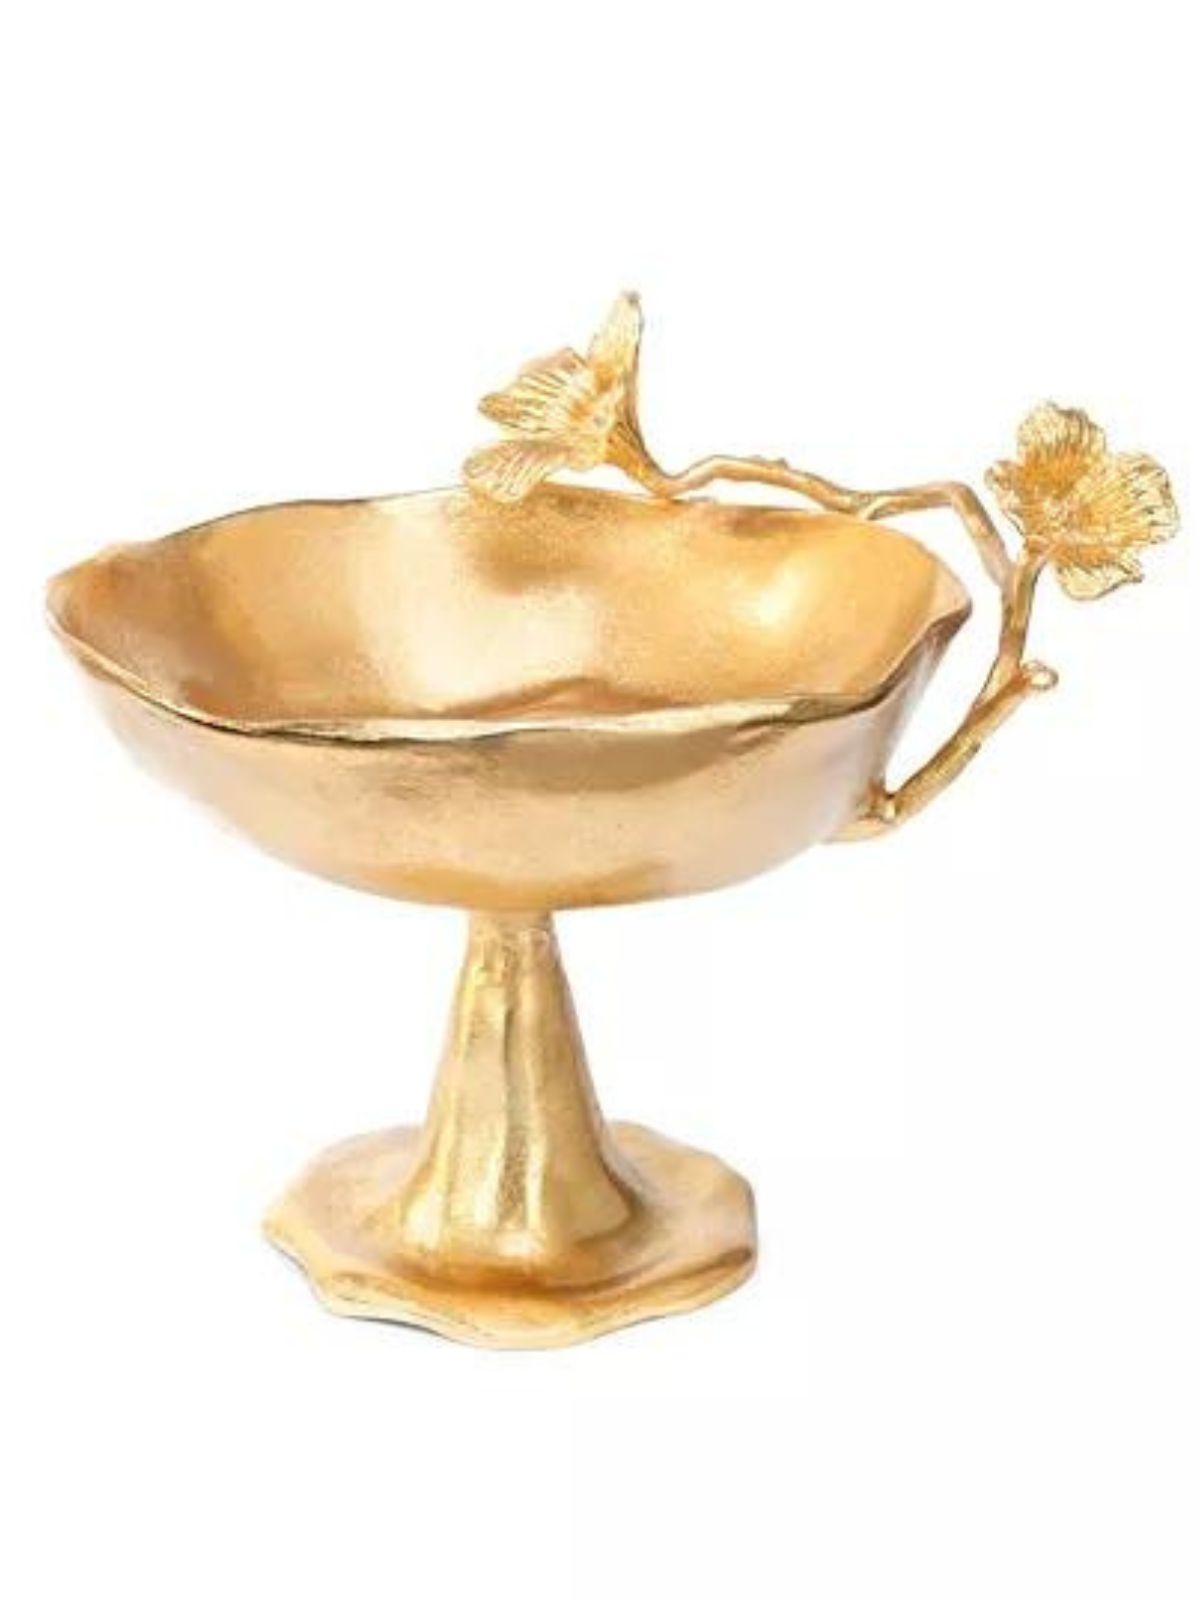 13D Footed bowl with gold lustrous finish along with a unique flower design sold by KYA Home Decor